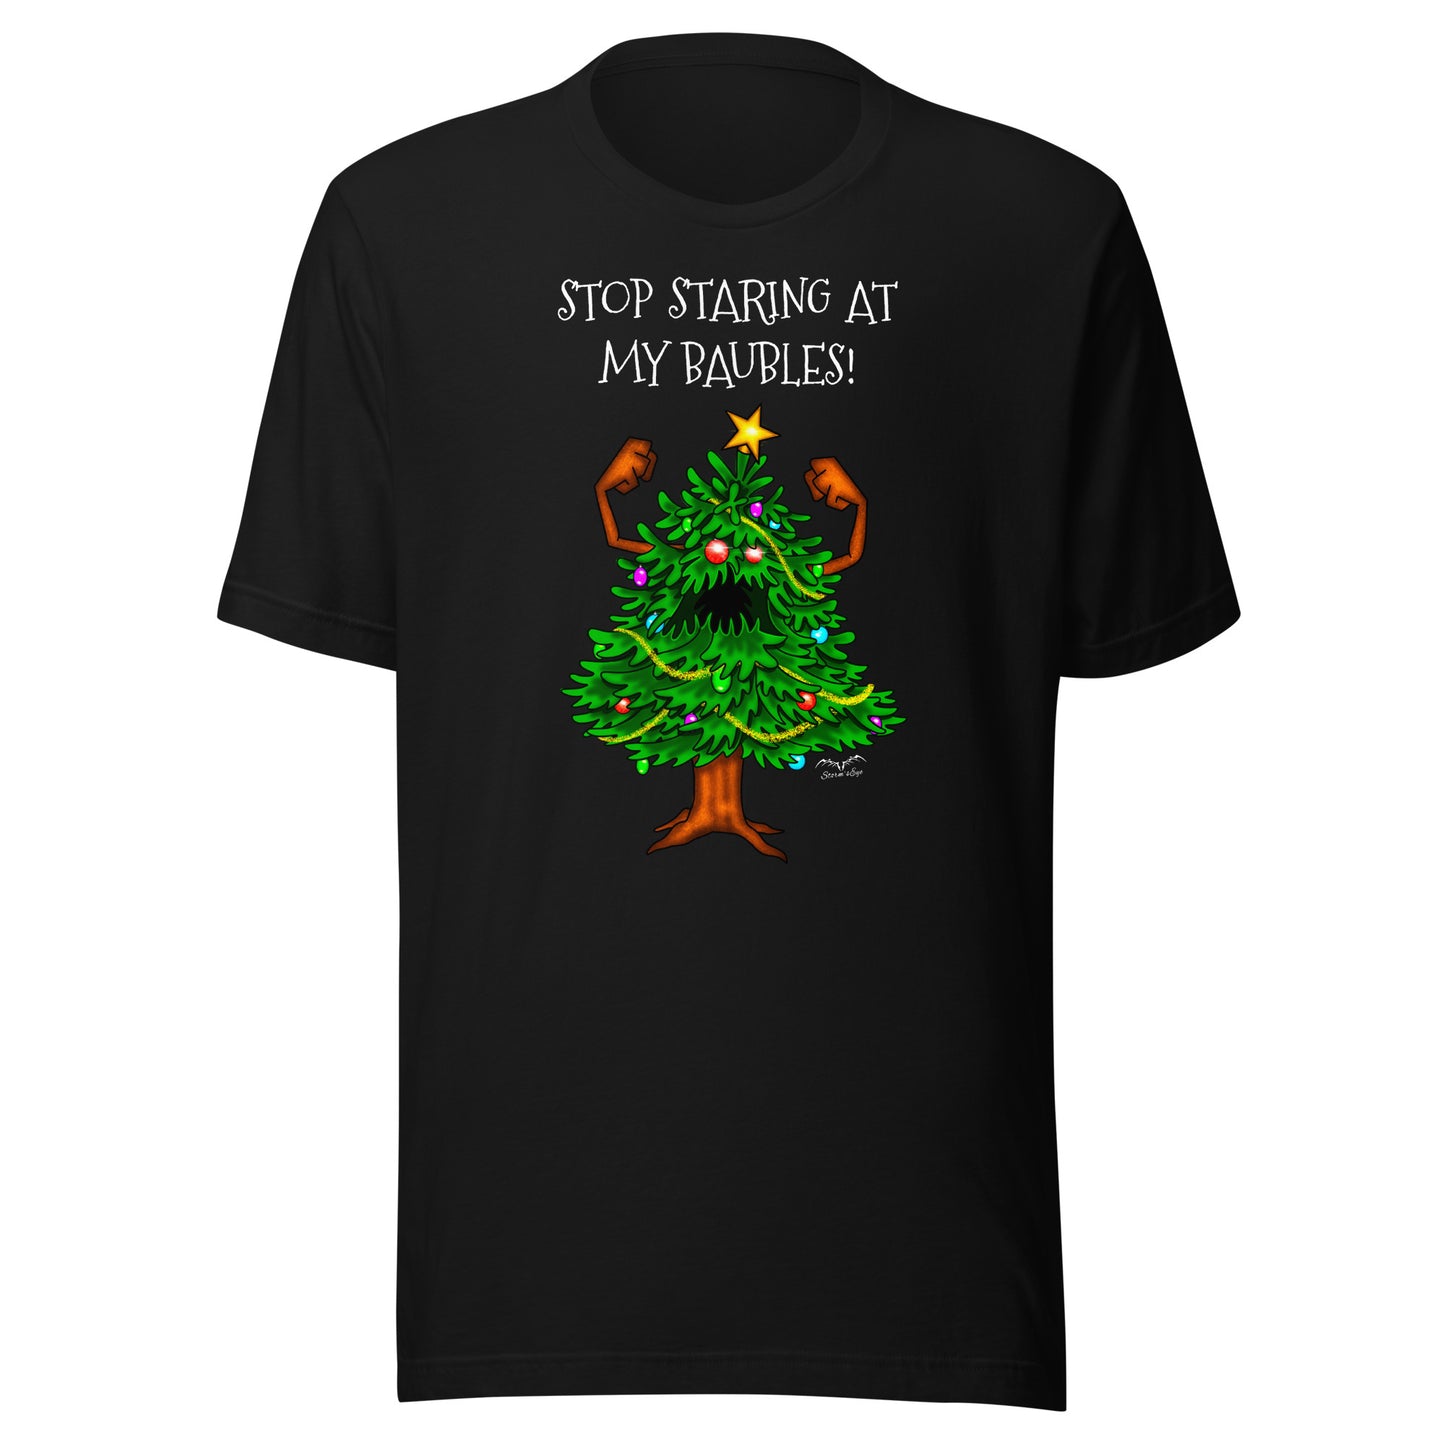 stormseye design angry christmas tree baubles T shirt, flat view black